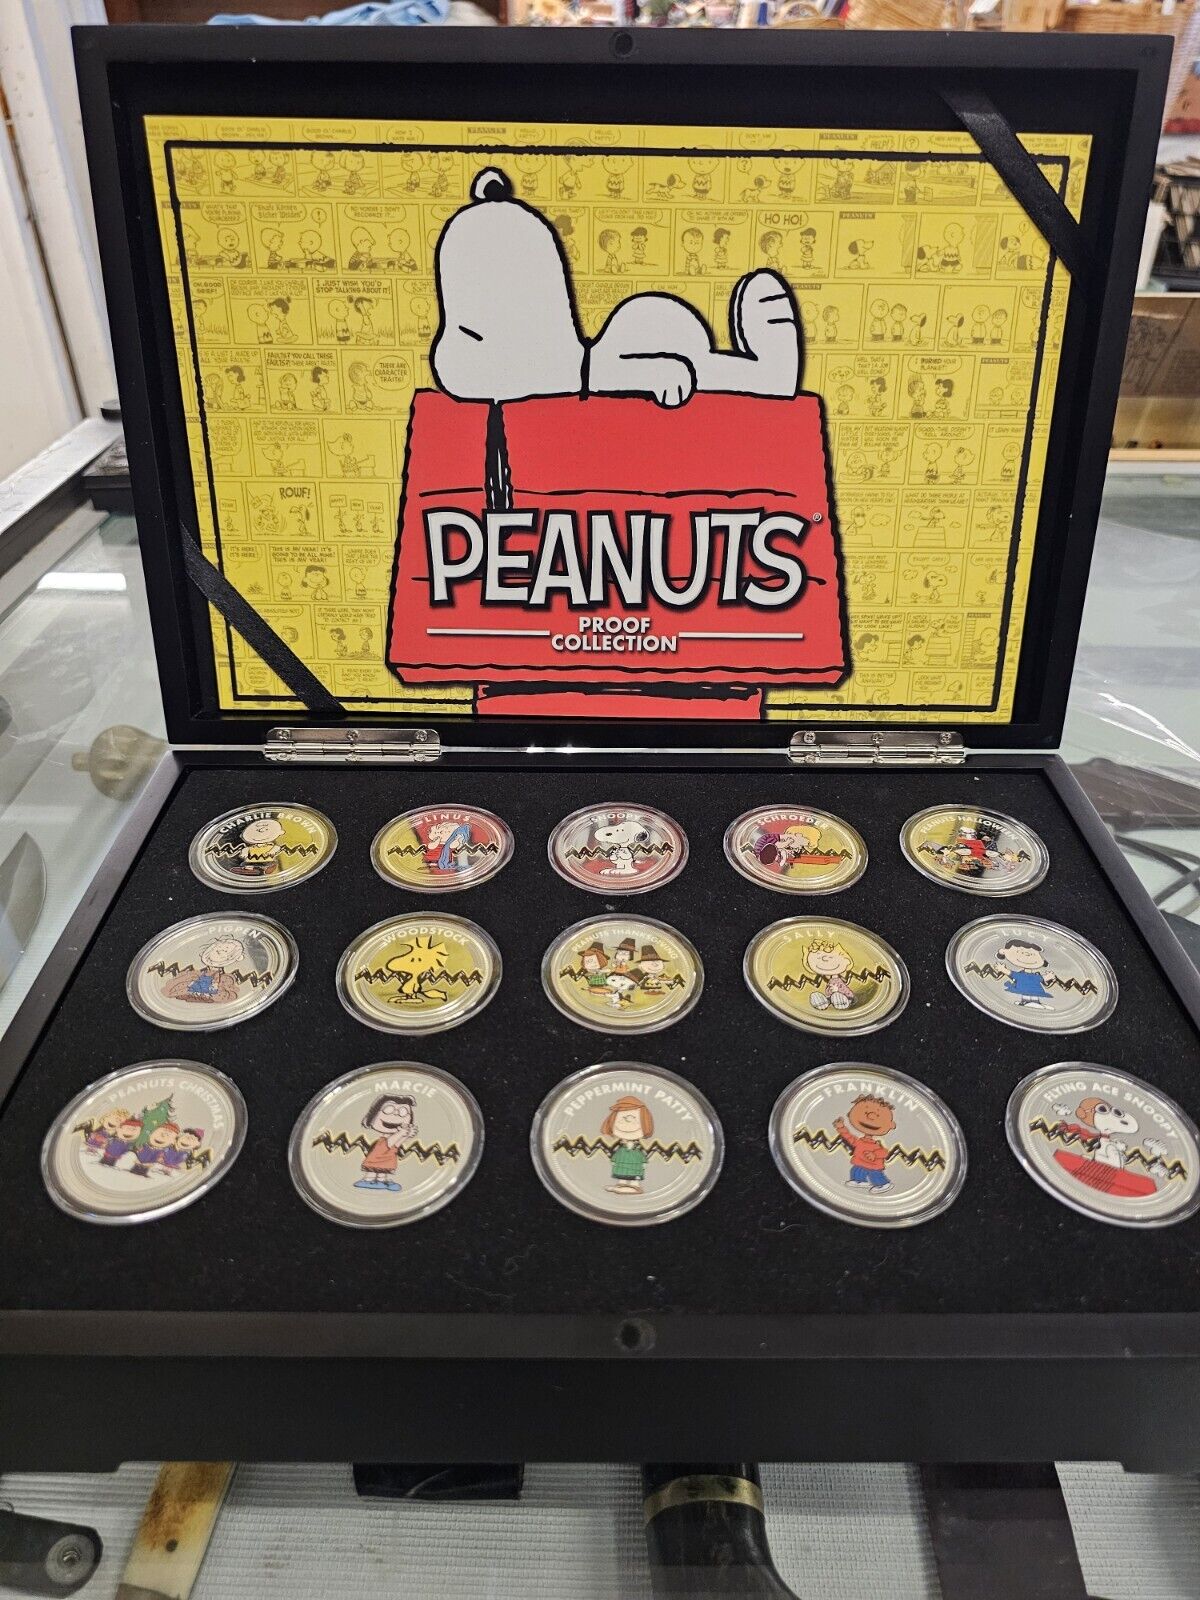 Limited / Rare 70th Anniversary PEANUTS Silver-Plated Proof Collection